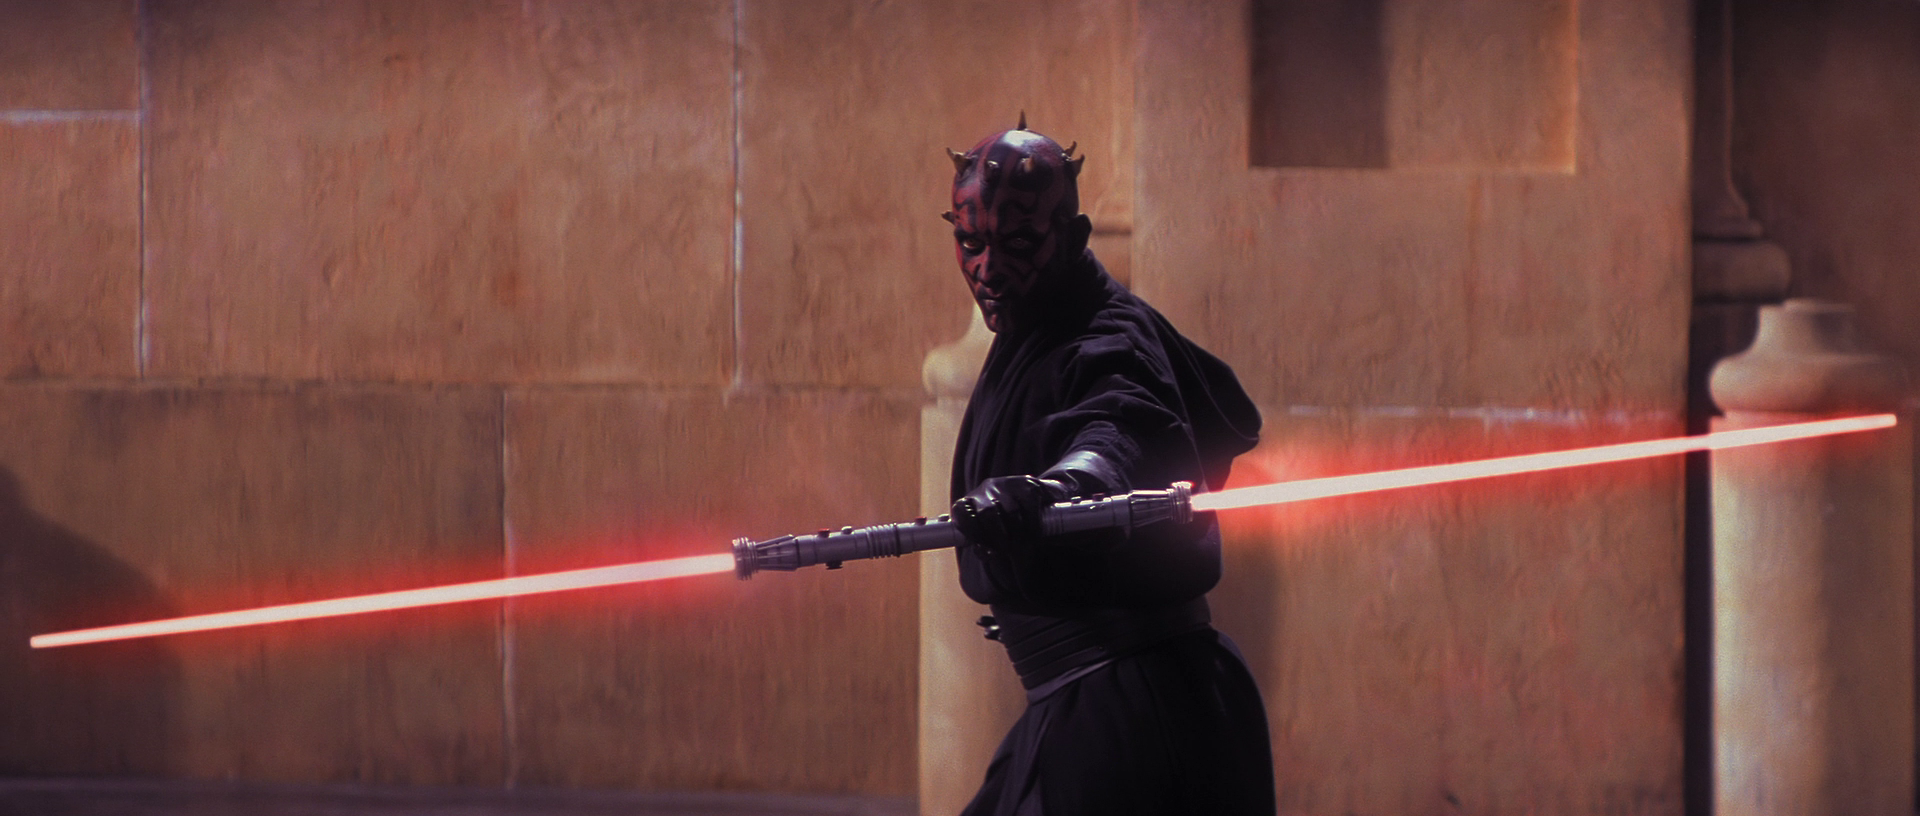 Darth Maul's Double Bladed Lightsabers